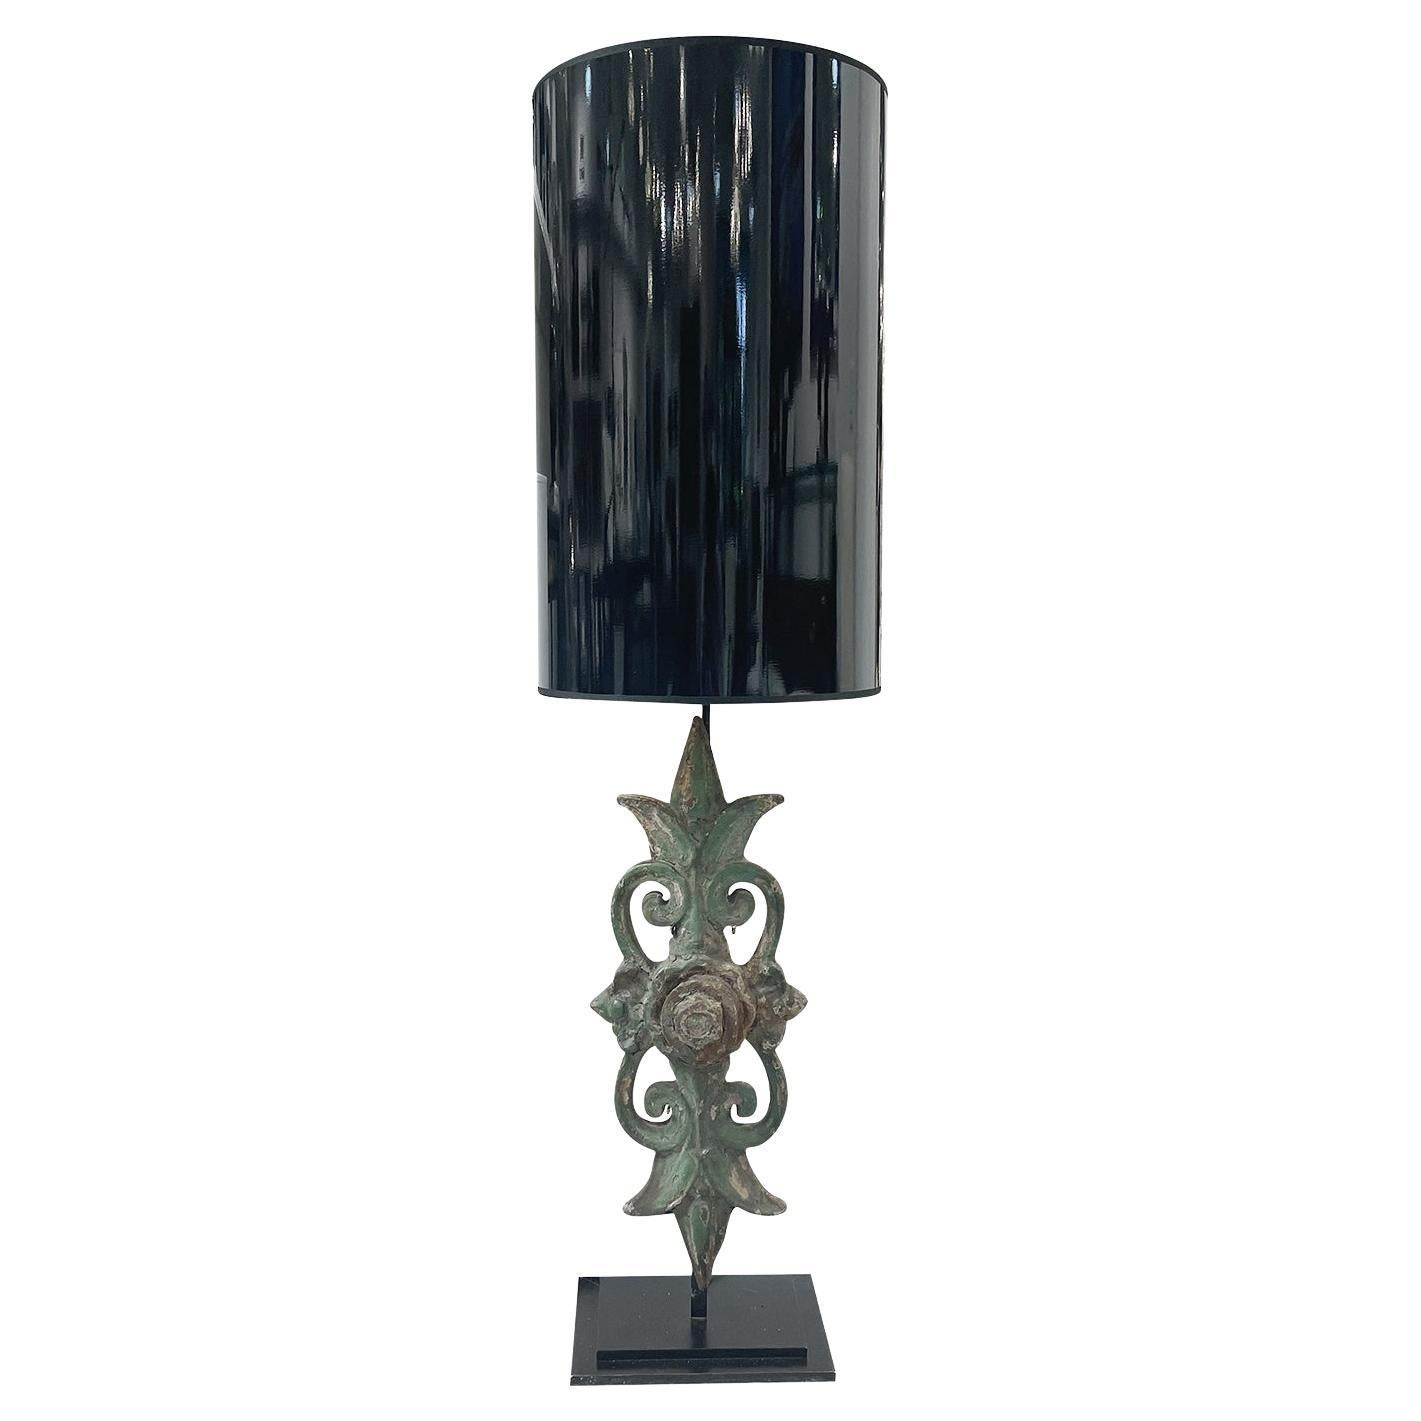 19th Century Black French Sculptural Iron Floor Lamp - Antique Light For Sale